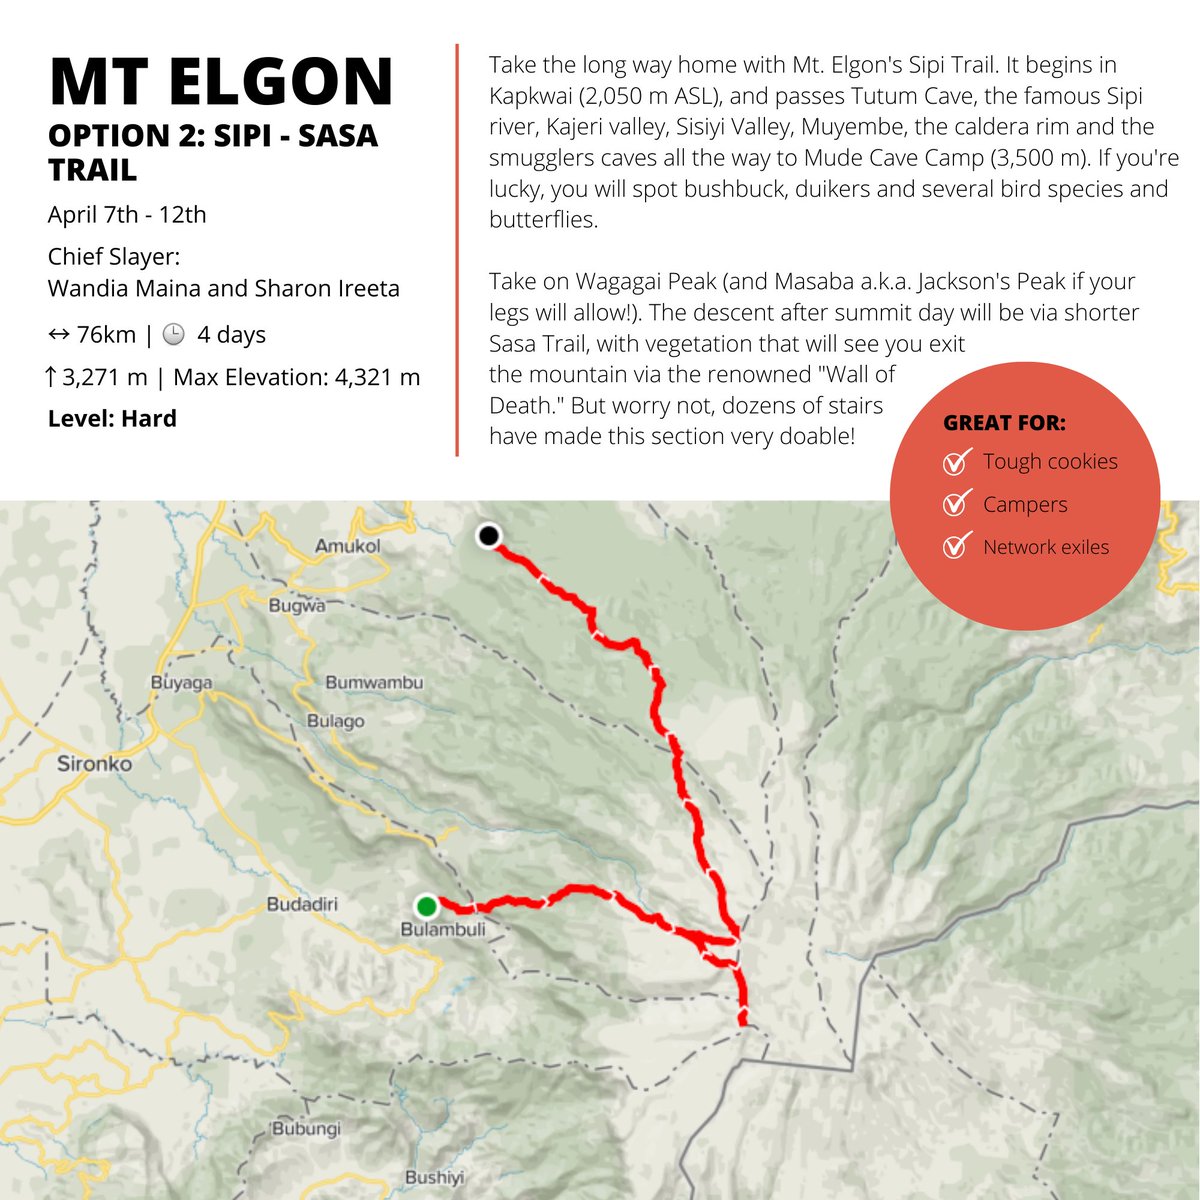 Upcoming in partnership with @Mountainslayers #MtElgon
See you on the trail 
#keepClimbing